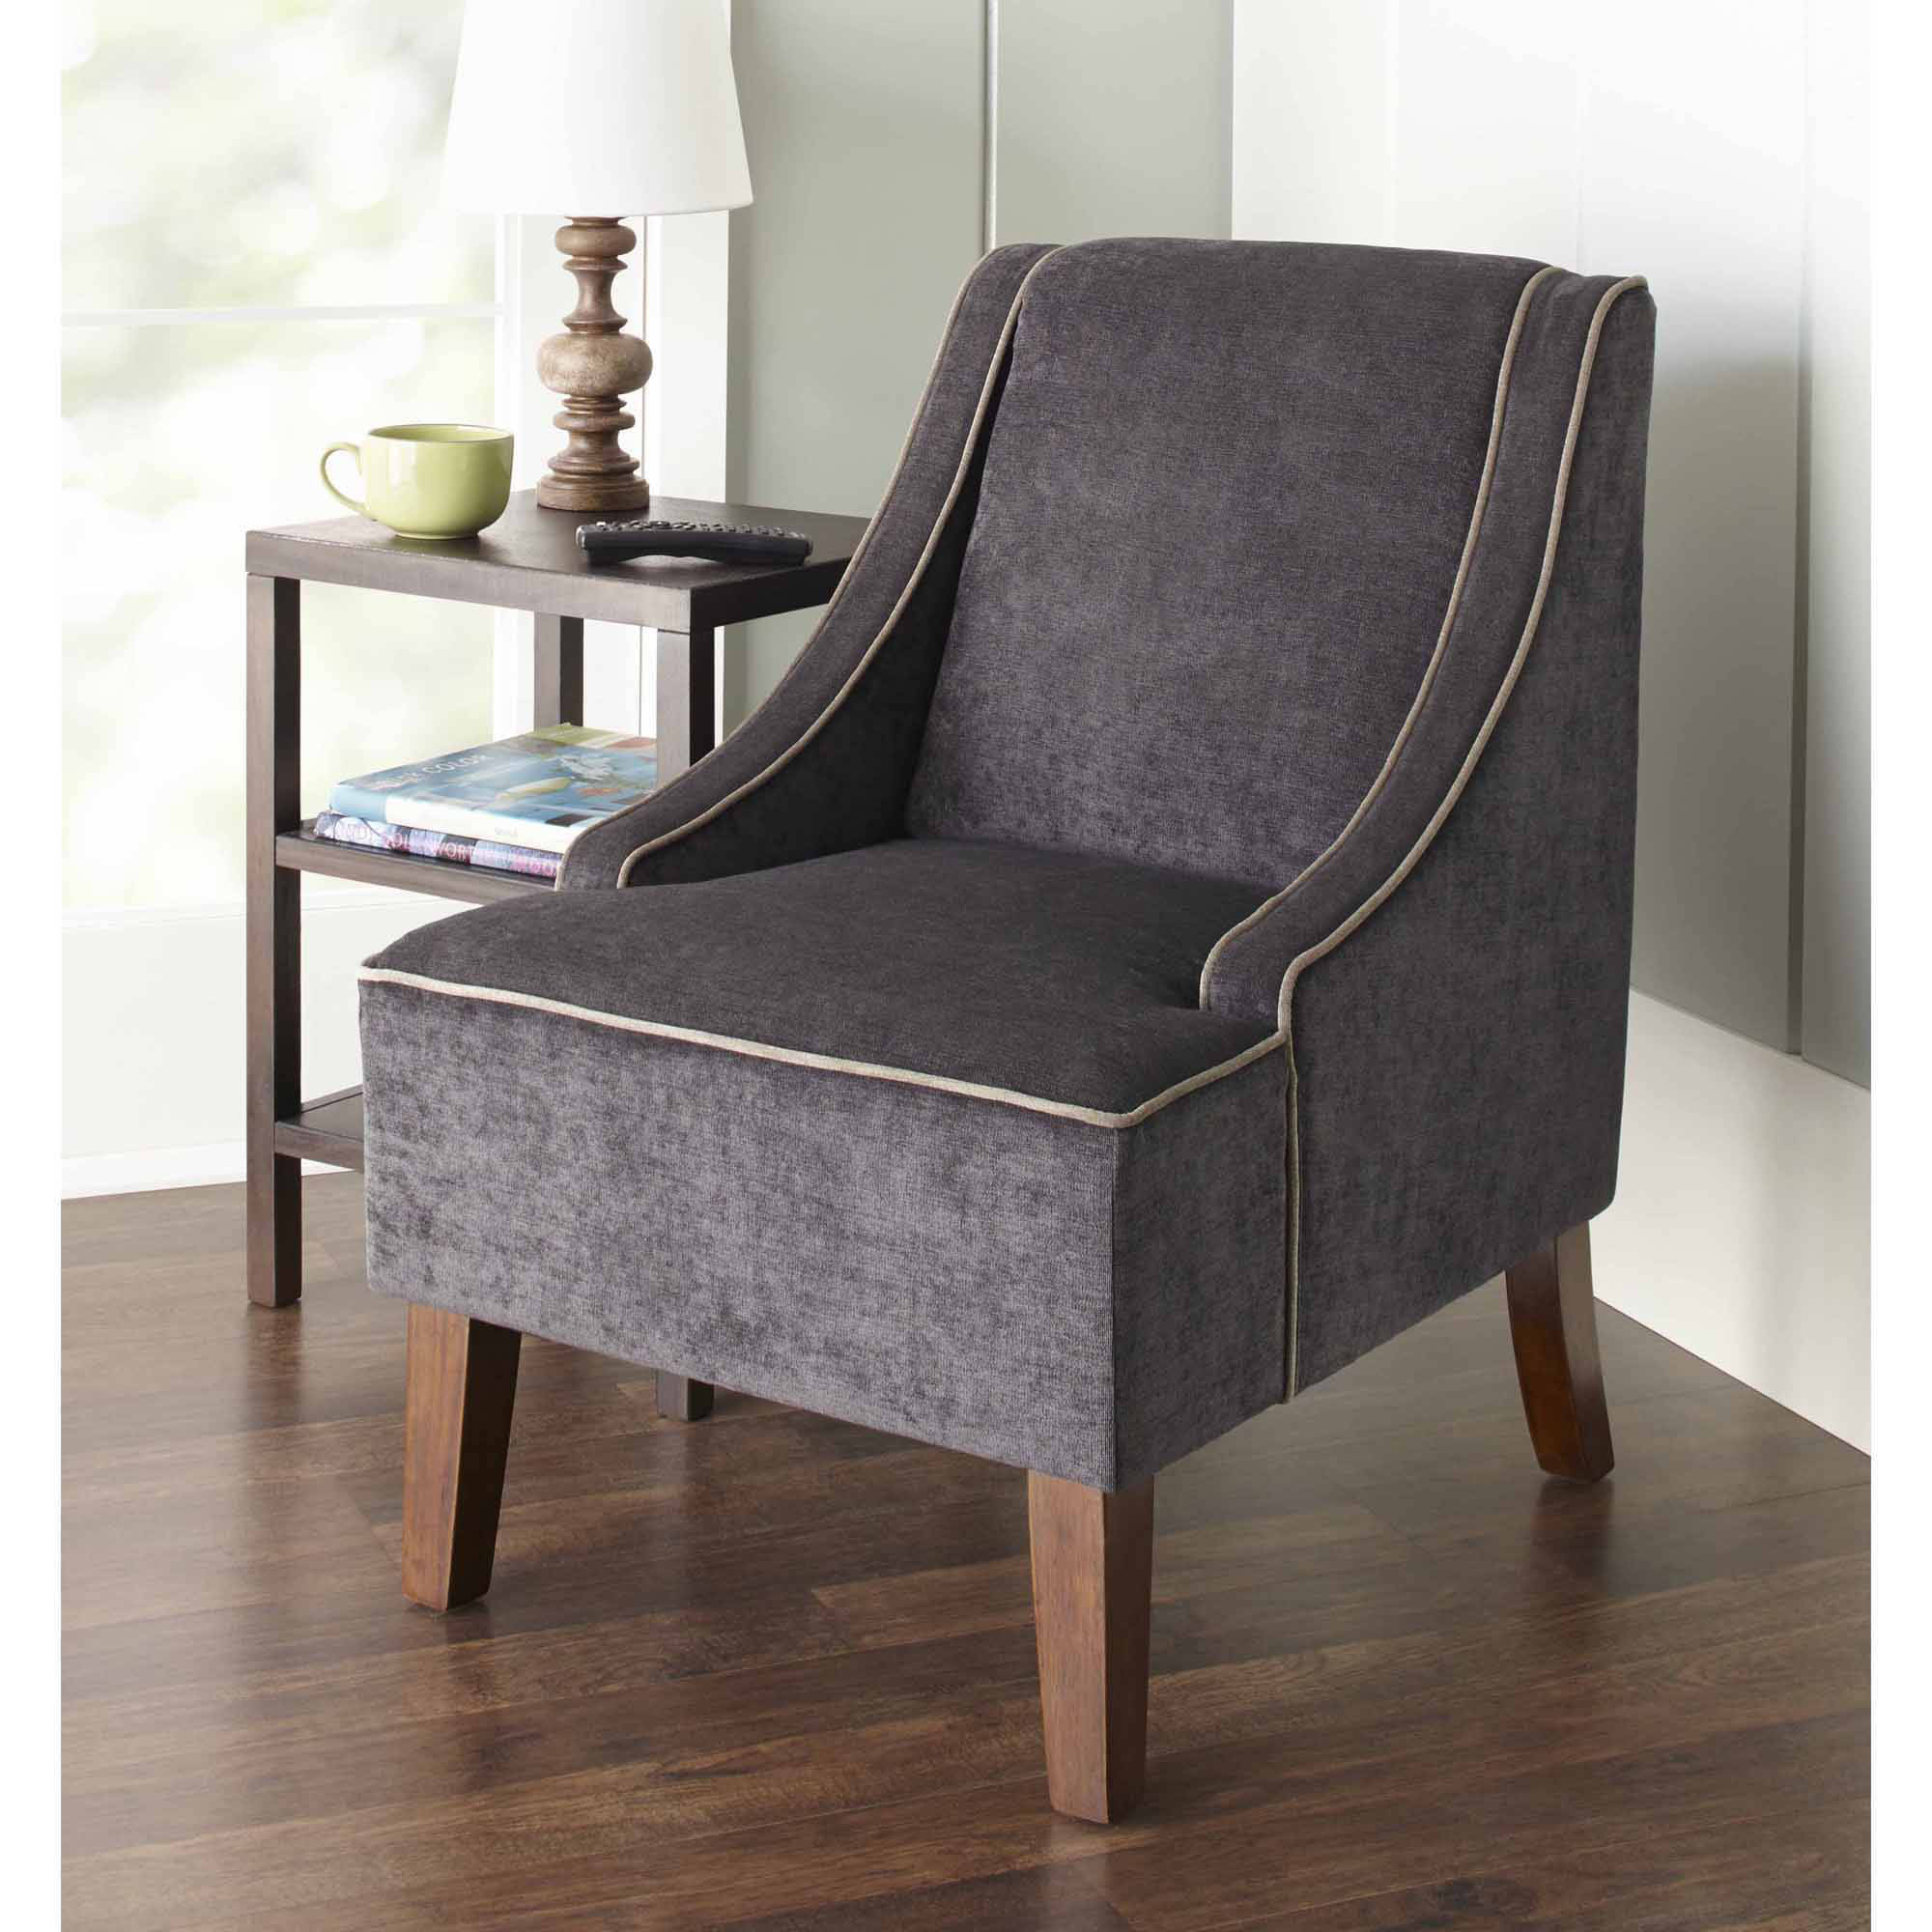 10 Spring Street Verona Tufted Arm Chair - image 1 of 2